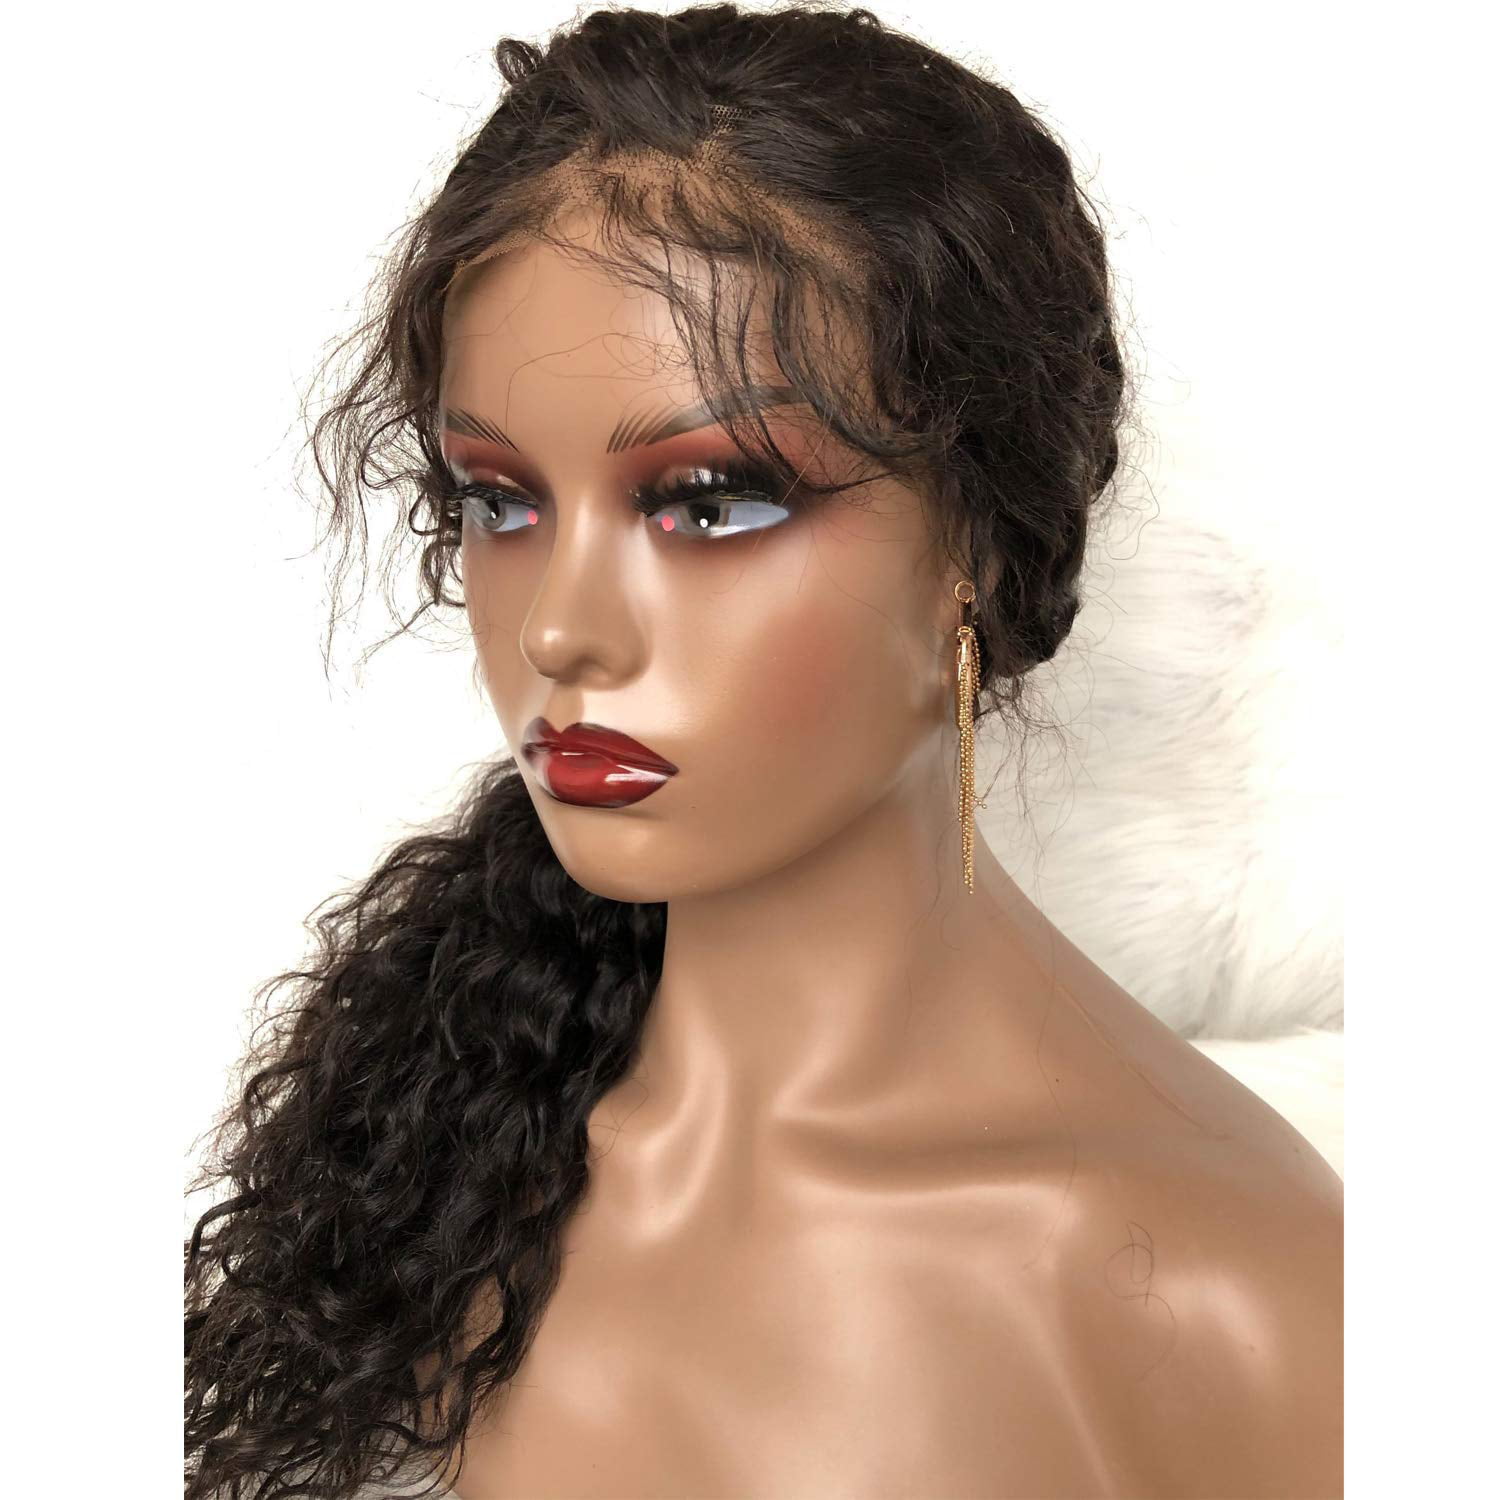 Voloria Realistic Female Mannequin Wig Head with Shoulder Manikin Head Bust  Wig Head Stand for Wigs Display Making,Styling,Sunglasses,Necklace Earrings  Light Brown Color - Yahoo Shopping